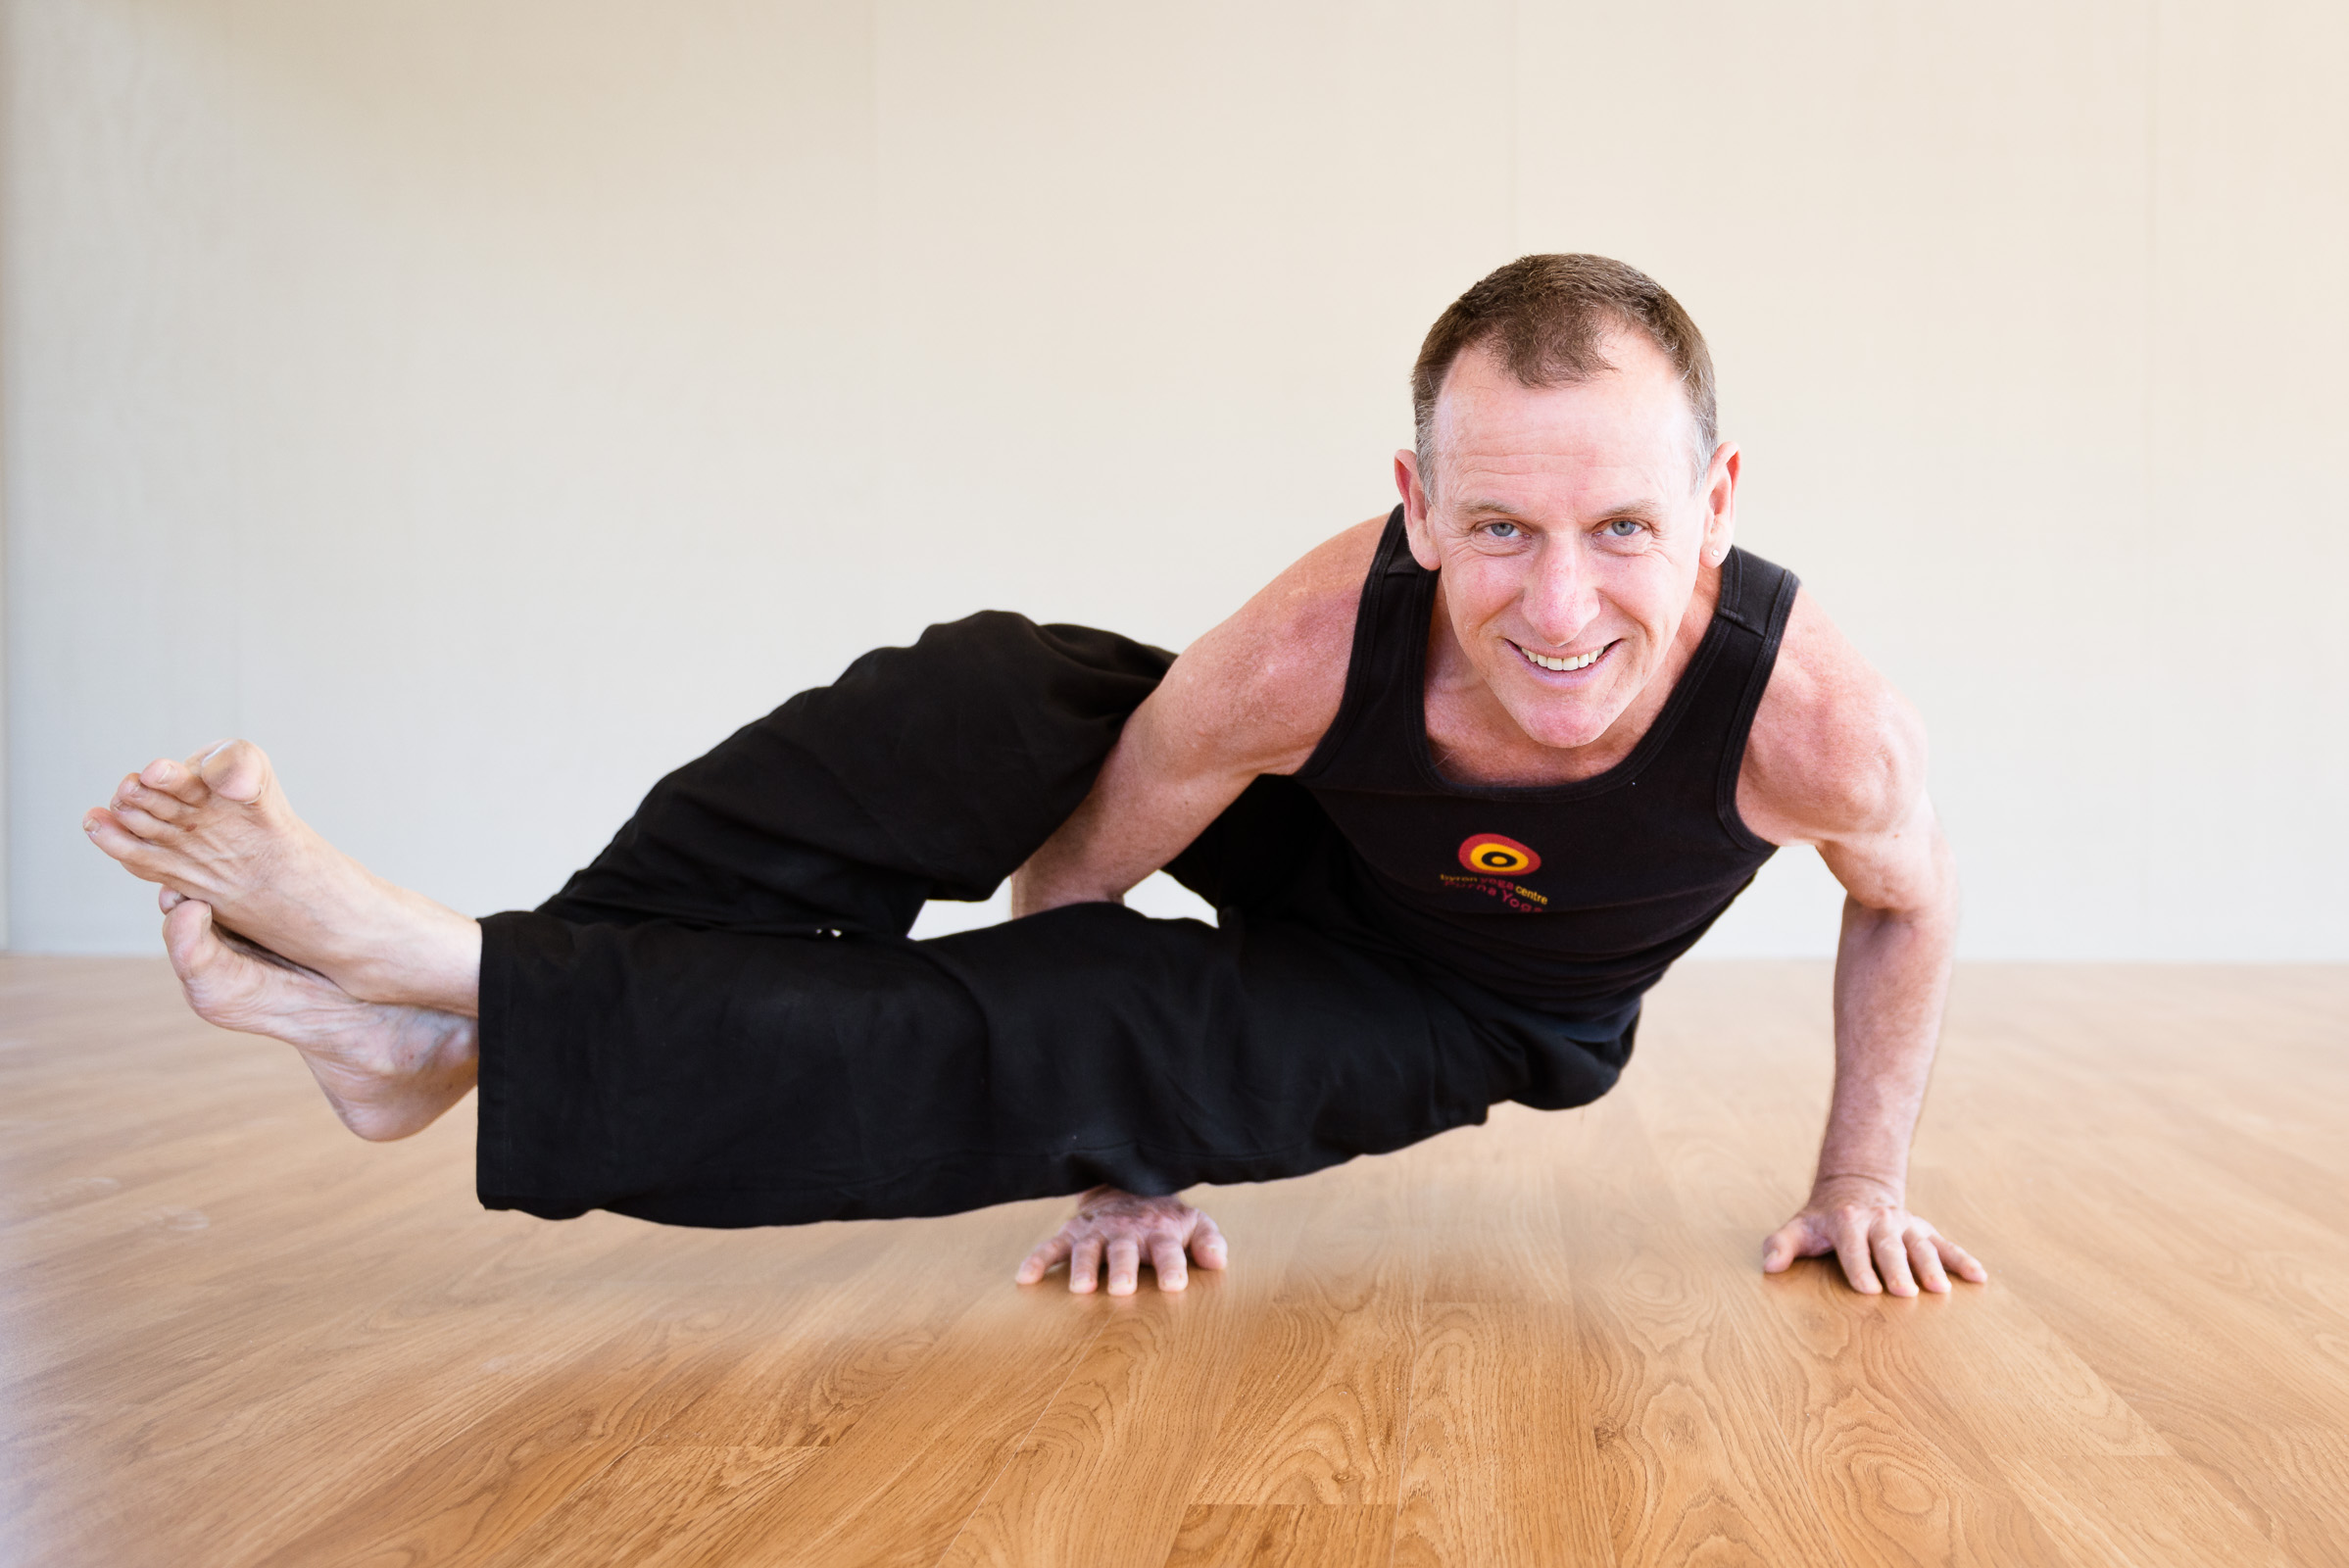 The perils of poses: Yoga-related injuries | Lower Extremity Review Magazine